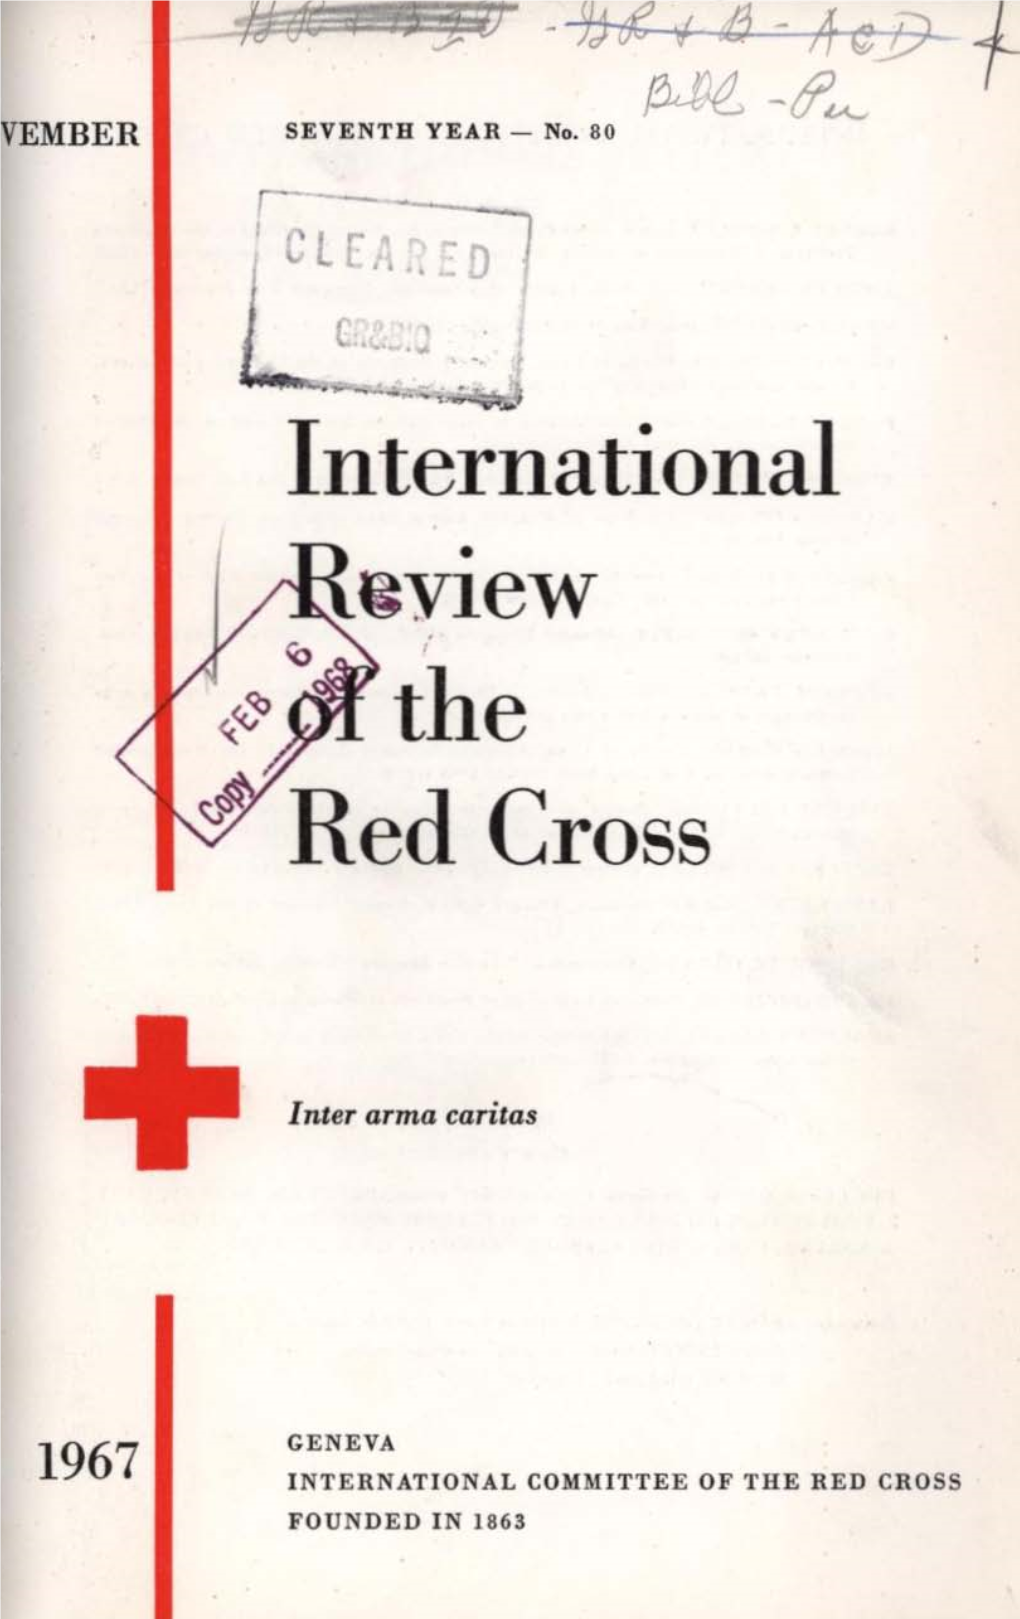 International Review of the Red Cross, November 1967, Seventh Year